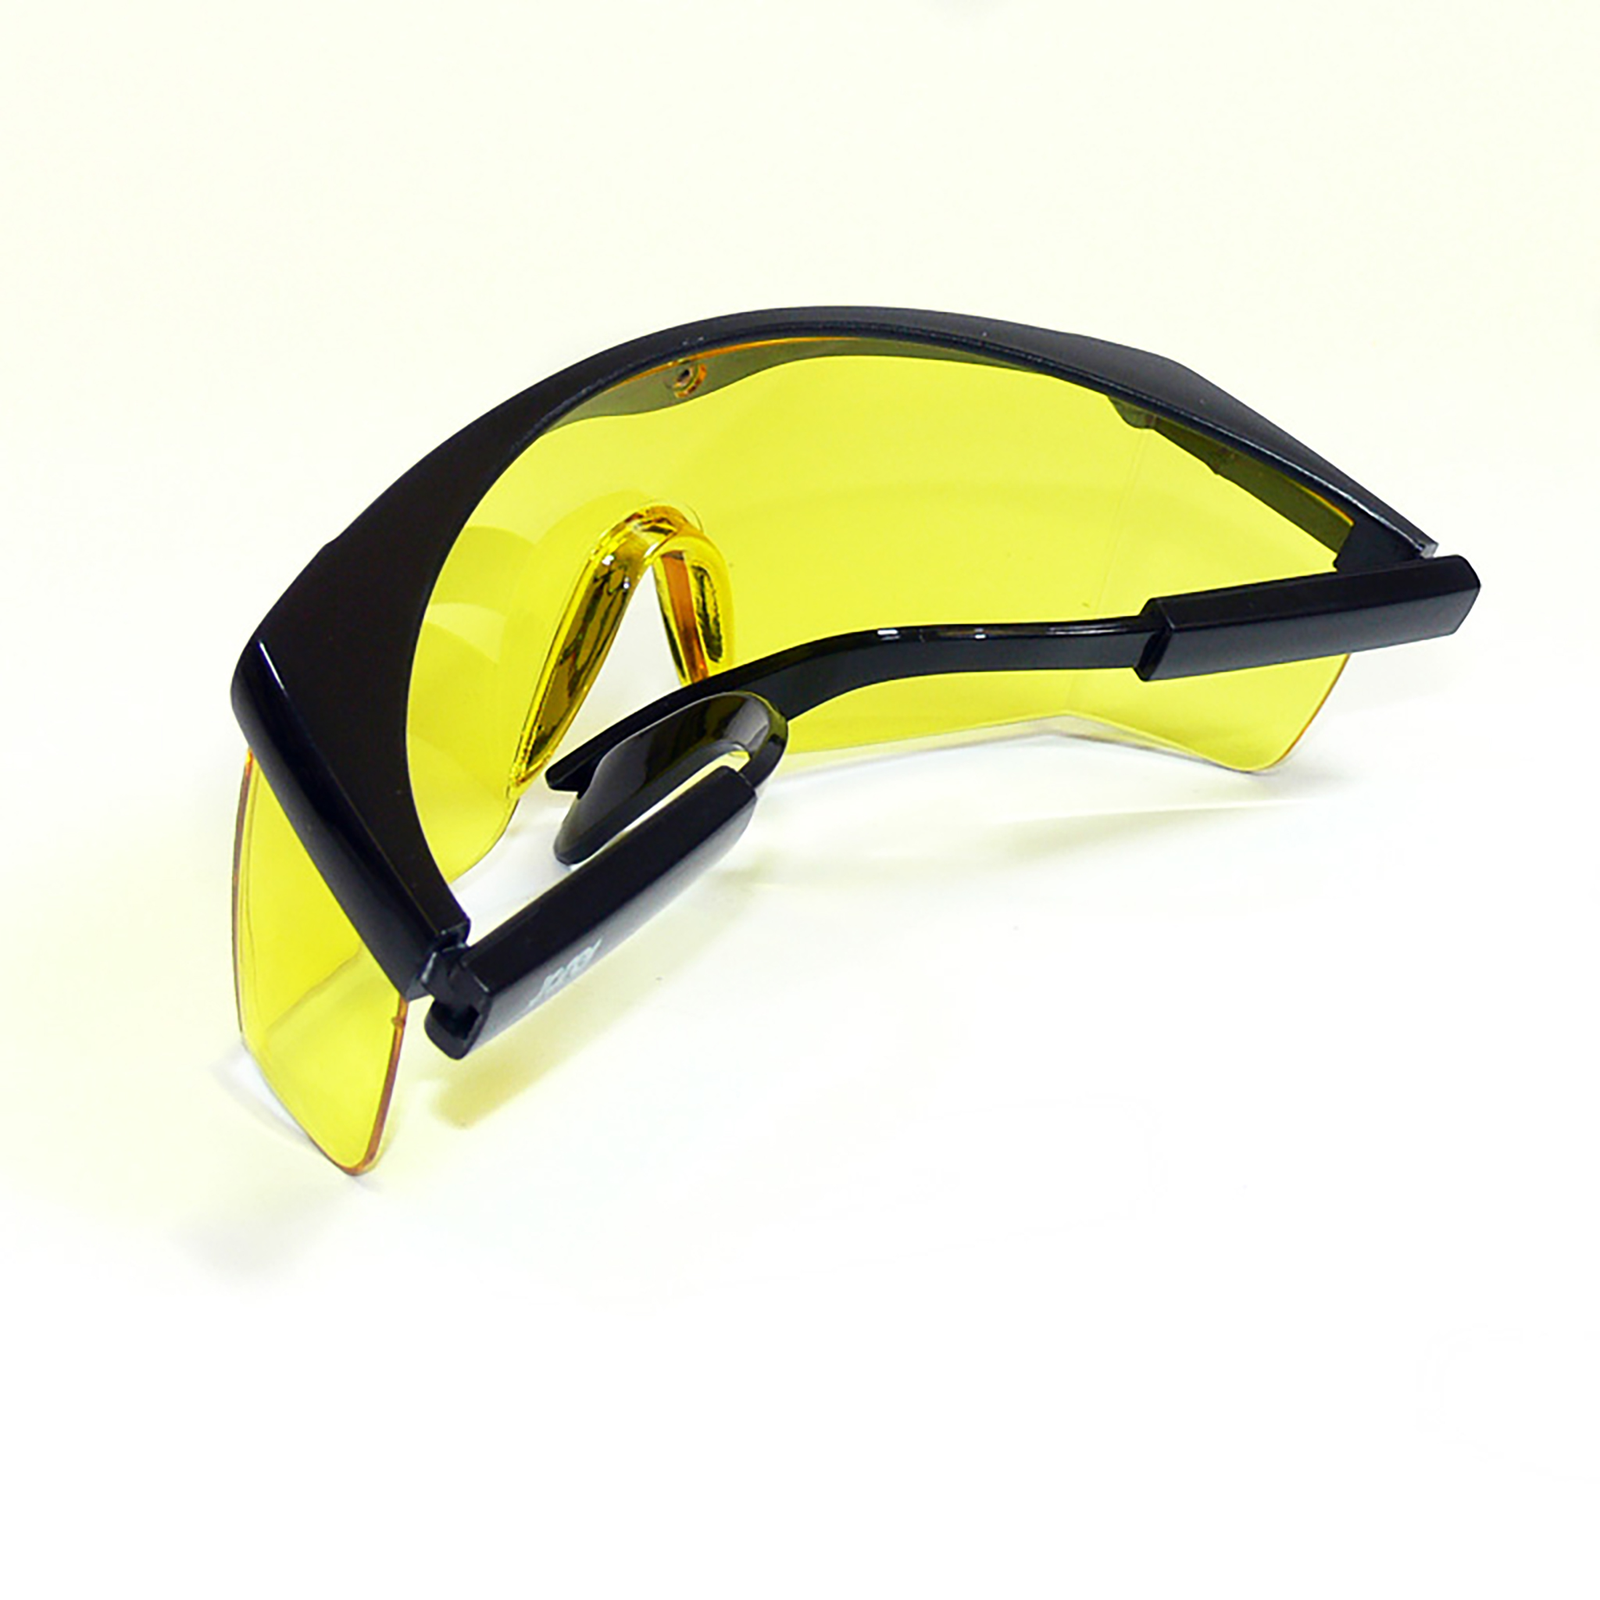 back folded view of the black framed rectangular safety yellow glasses with side shields for high impact protection with adjustable temple legs